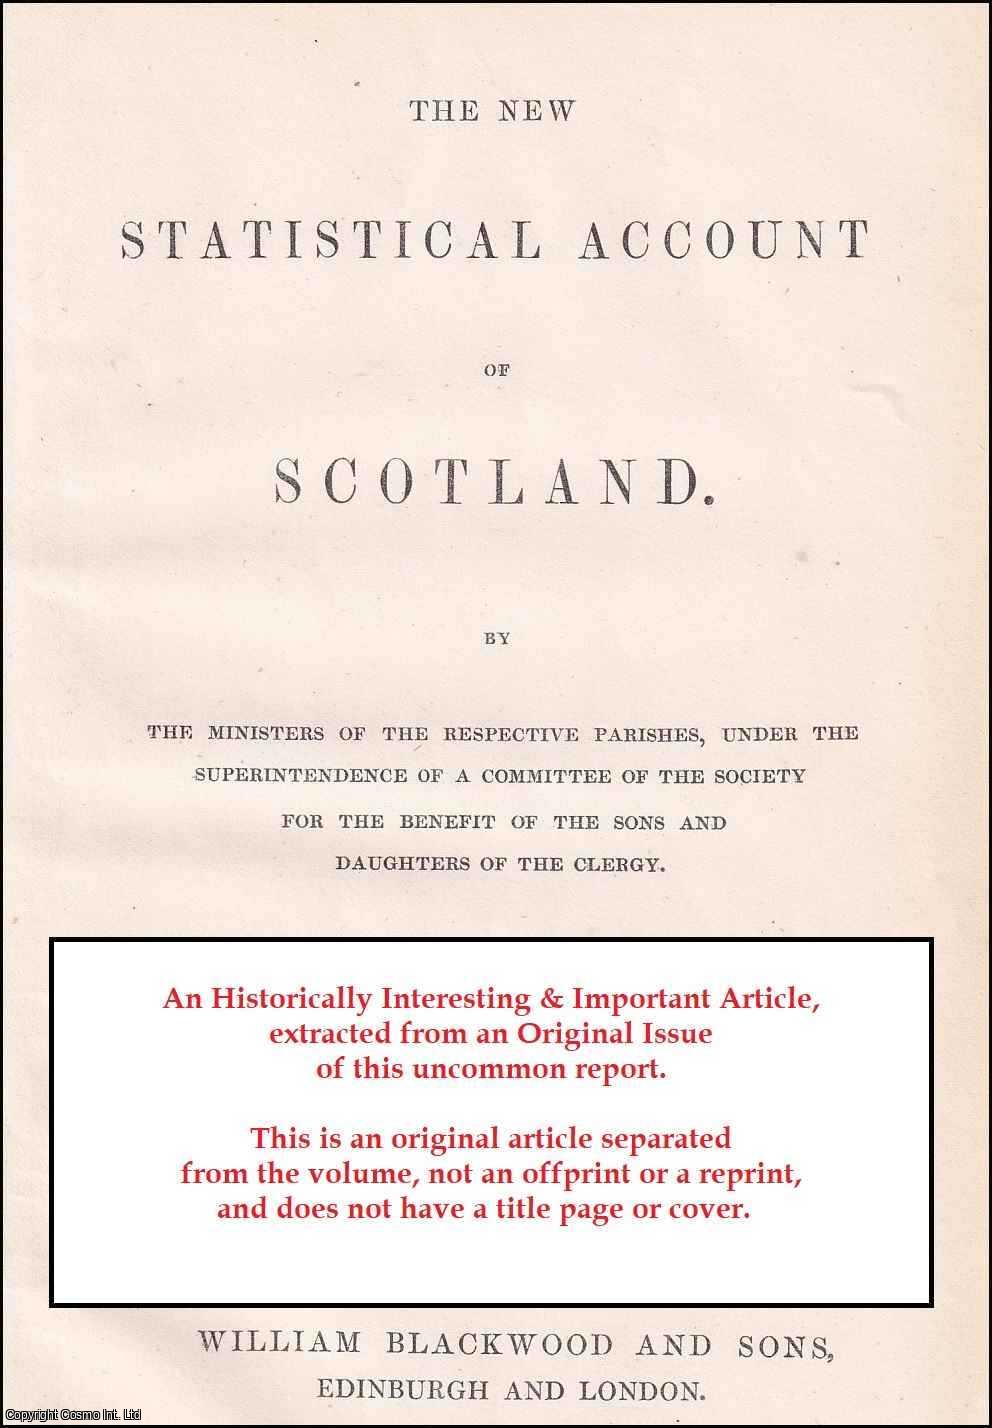 Rev. Archibald Blair Campbell - Parish of Kilwinning. Presbytery of Irvine, Synod of Glasgow and Ayr. An uncommon original article from The New Statistical Account of Scotland, 1845.